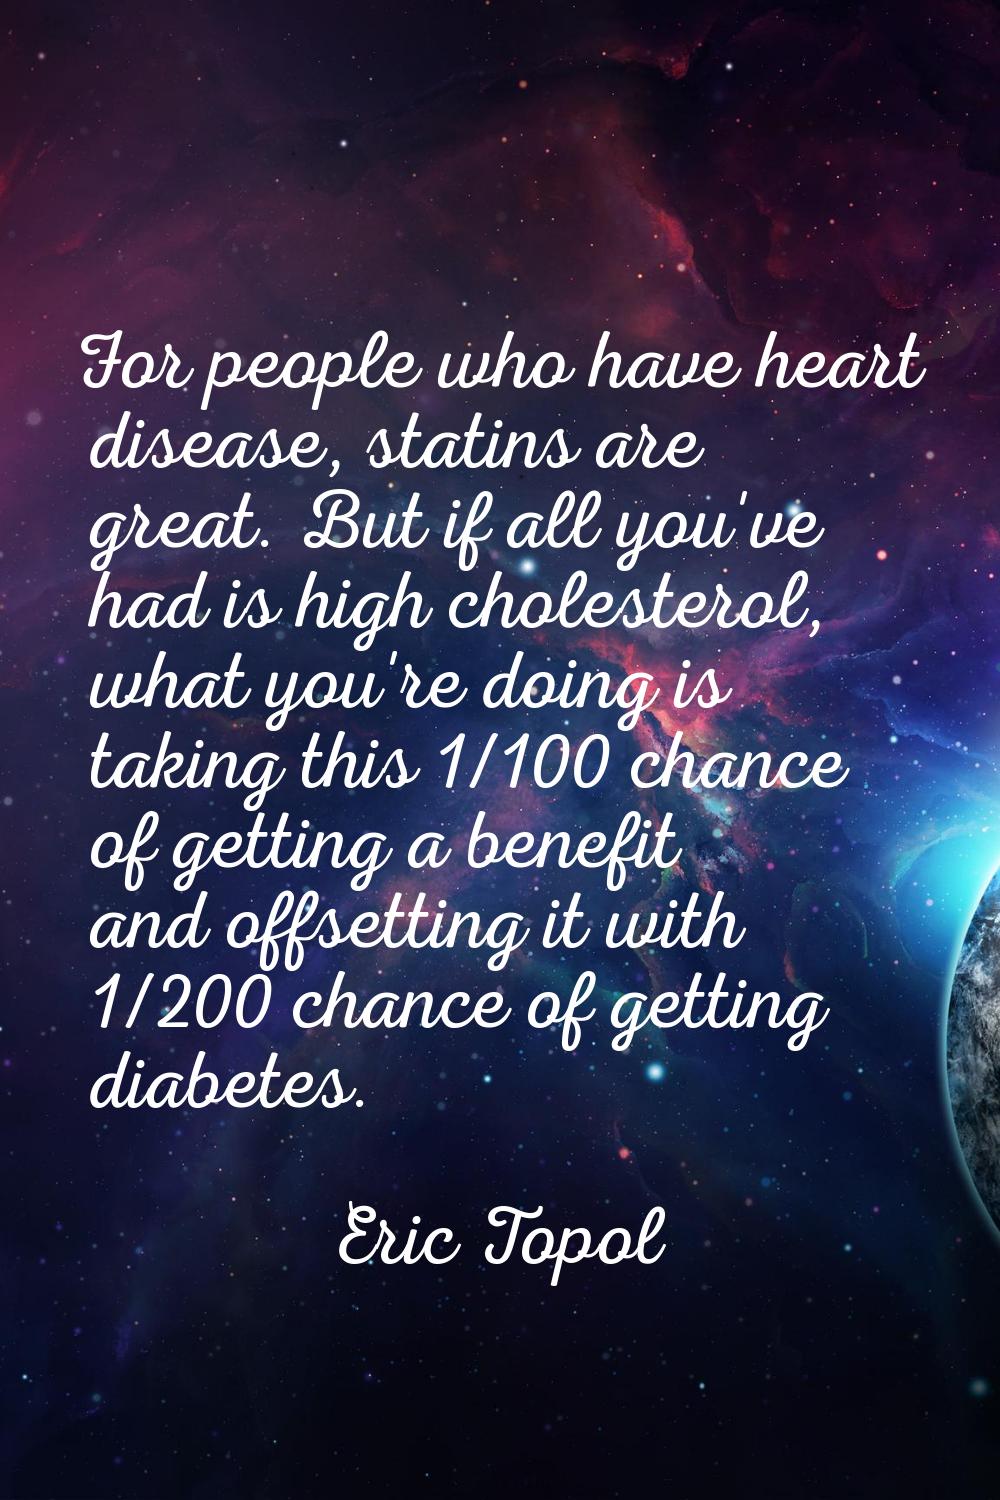 For people who have heart disease, statins are great. But if all you've had is high cholesterol, wh